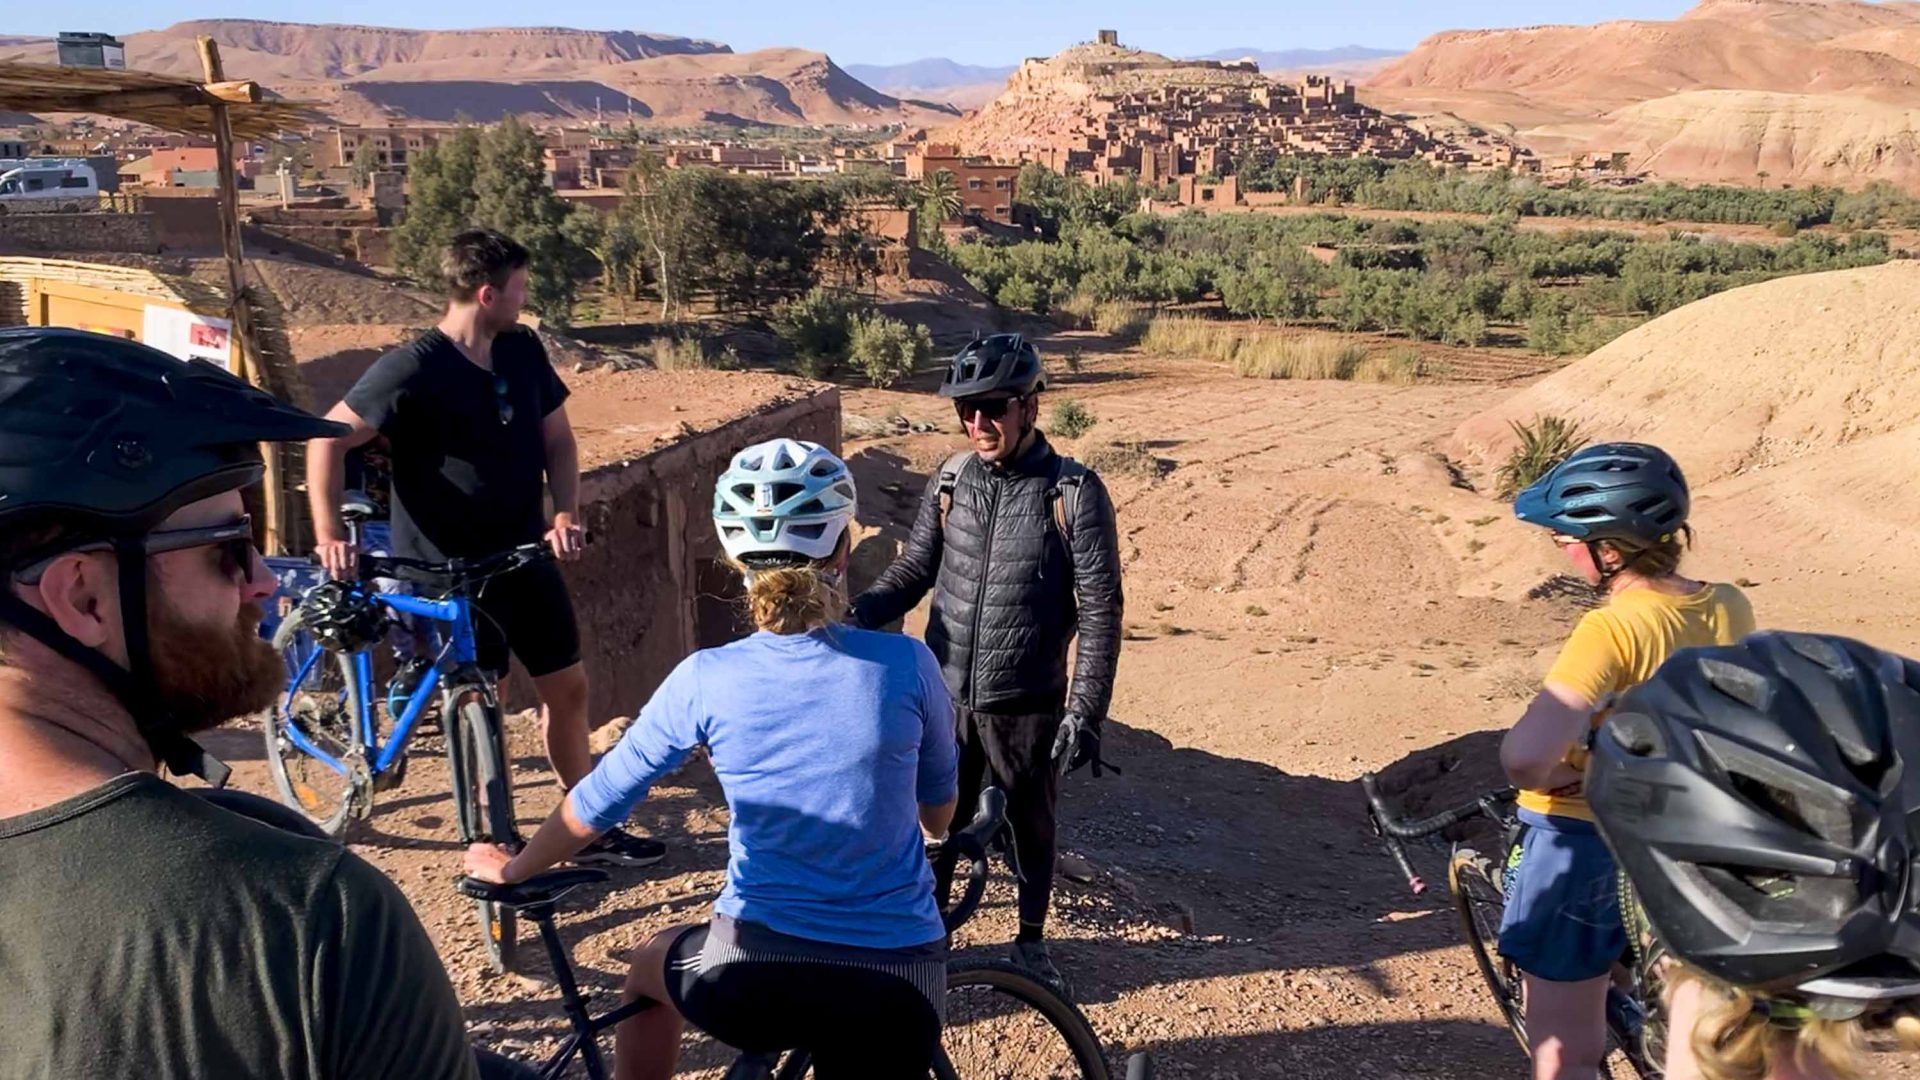 “An overwhelming sensory experience”: Cycling Morocco in search of slow travel